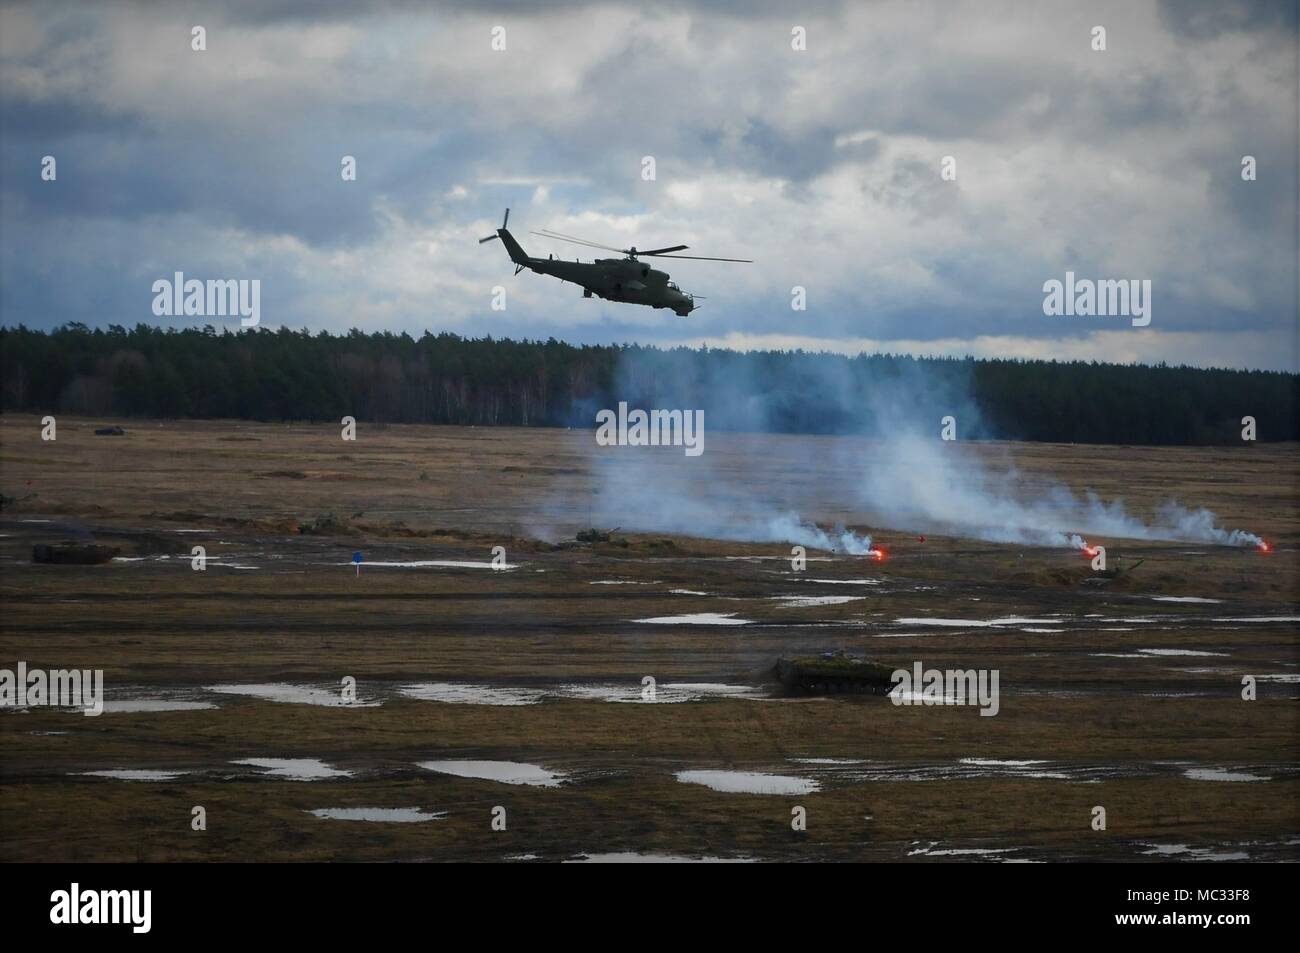 Mi-24 (Hind D) provides overhead protection for ground forces during the NATO Live Fire Exercise near Bemowo Piskie Training Area, Poland on Jan. 30, 2018. Battle Group Poland is a unique, multinational battle group, comprised of U.S., U.K., Croatian and Romanian soldiers who serve with the Polish 15th Mechanized Brigade as a deterrence force in northeast Poland in support of NATO’s Enhanced Forward Presence. (U.S. Army photo by Capt. Gary Loten-Beckford/ 22nd Mobile Public Affairs Detachment) Stock Photo